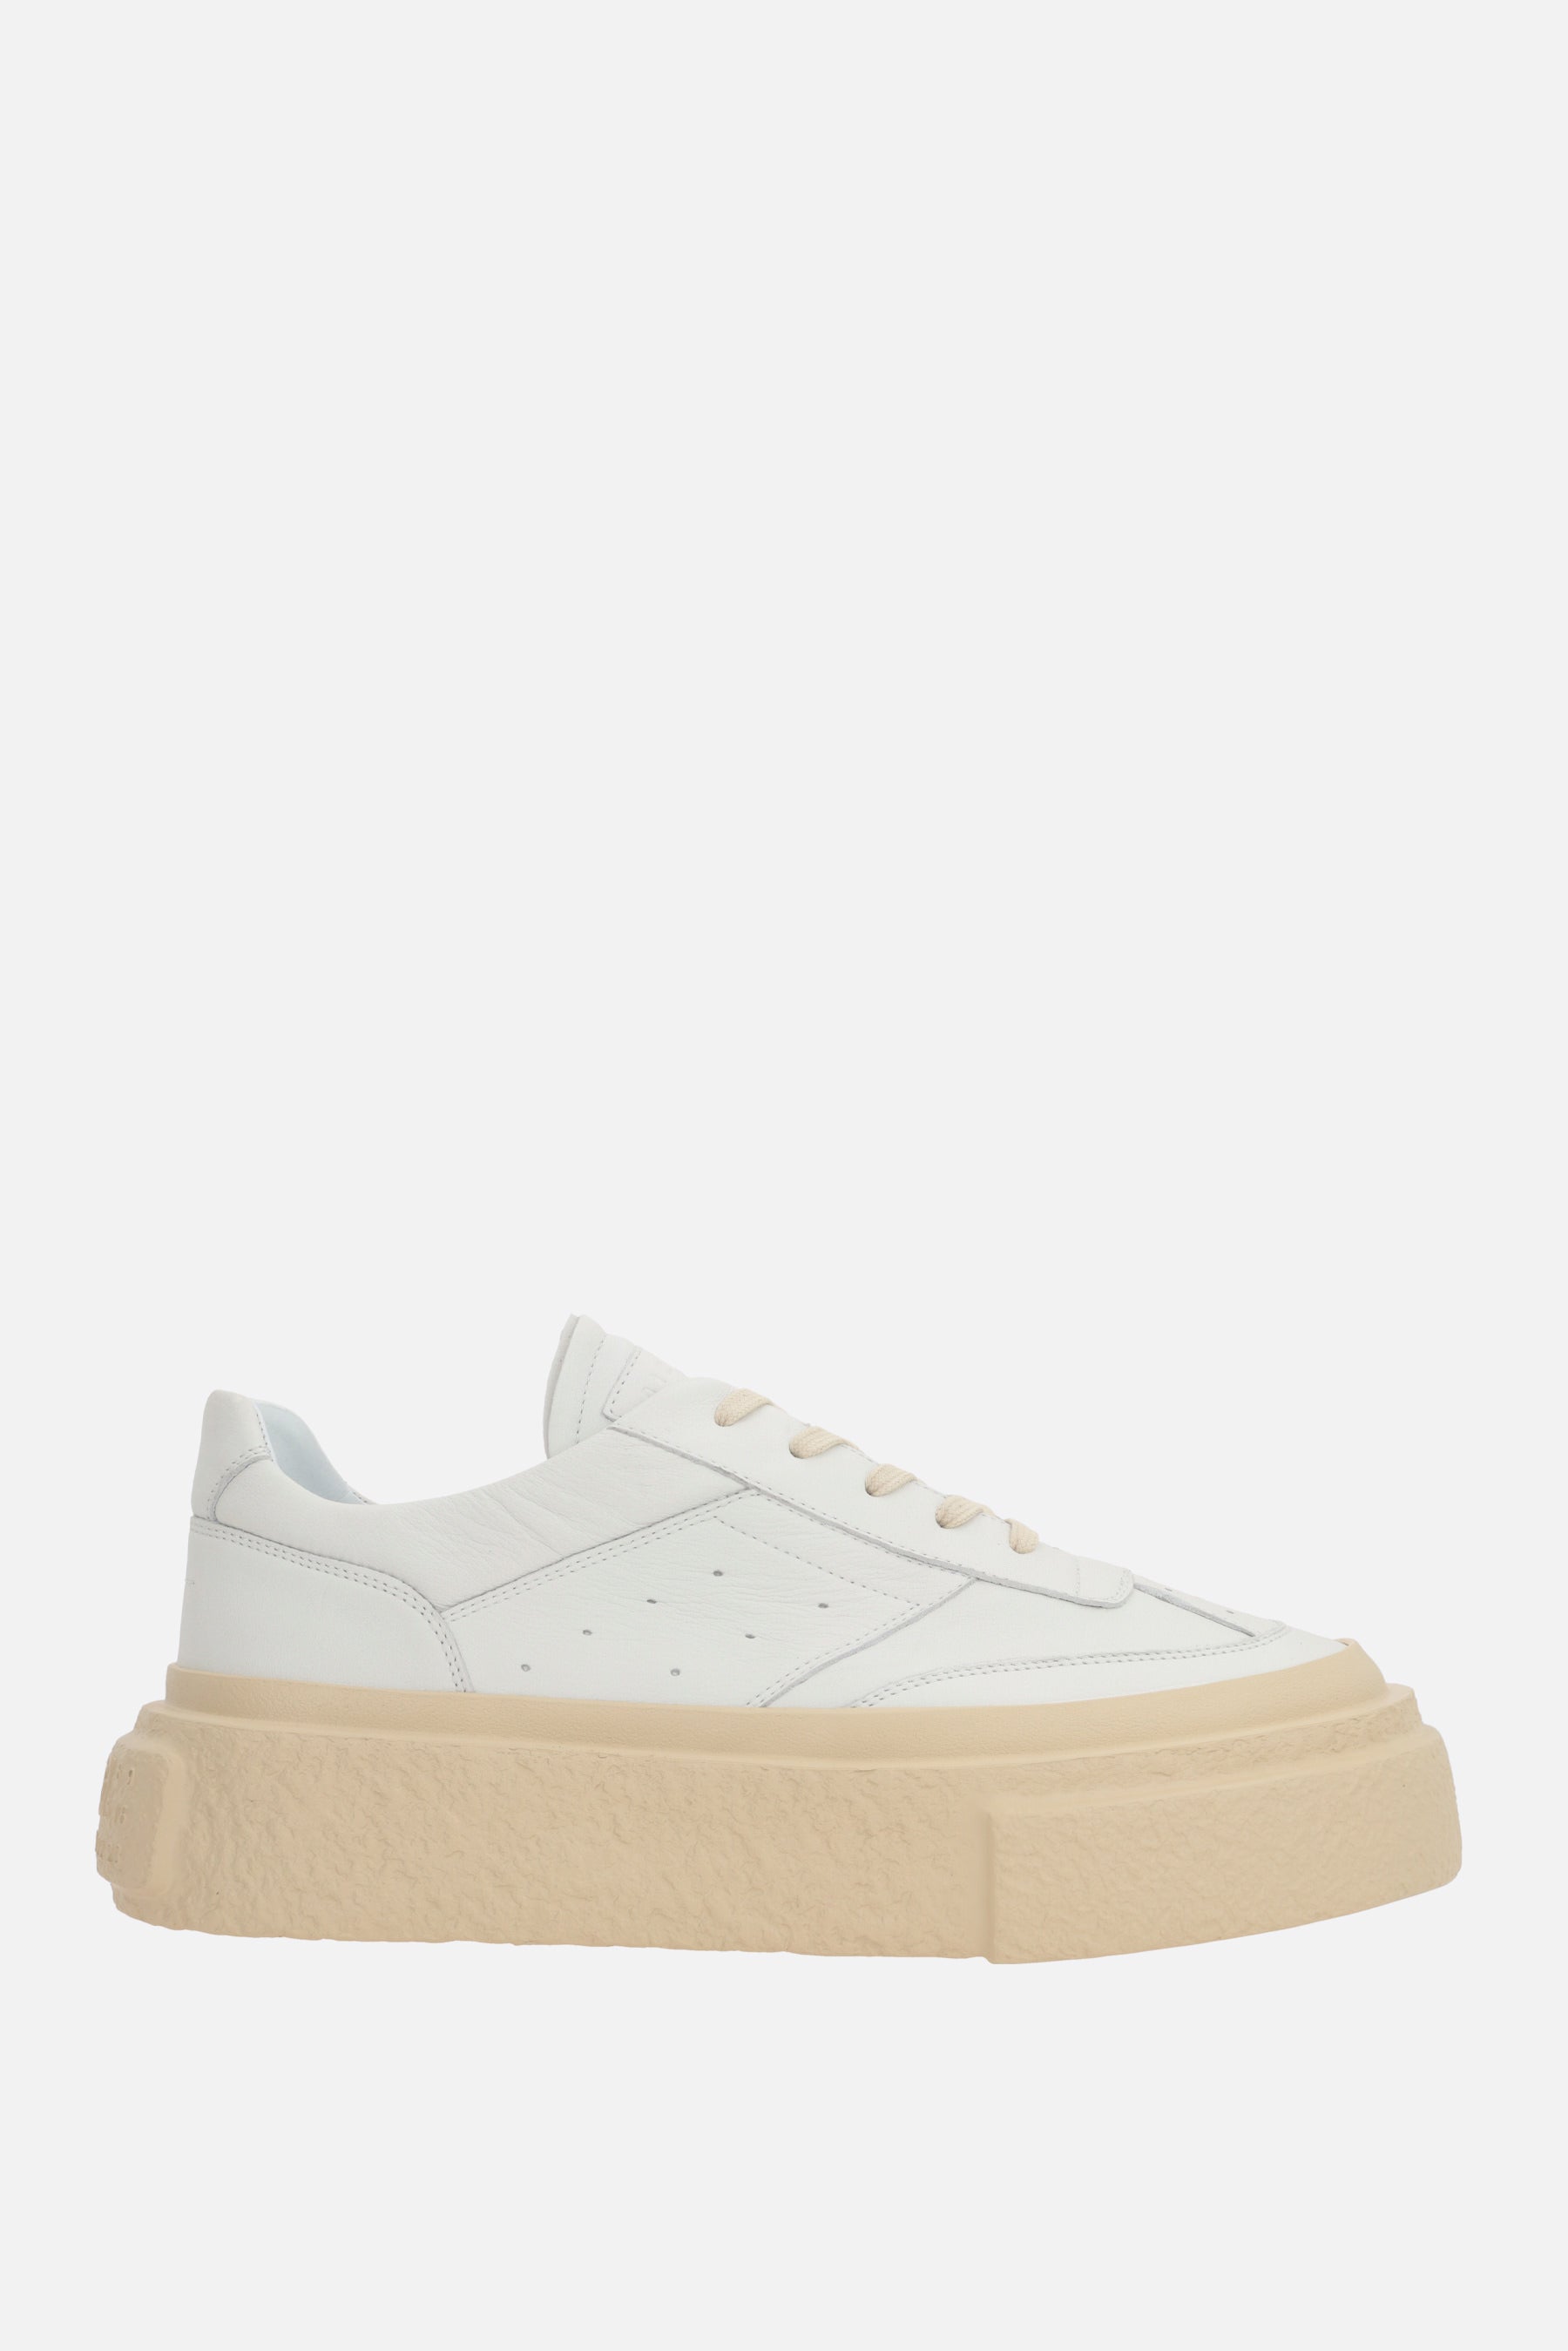 Chunky Gambetta smooth leather flatform sneakers